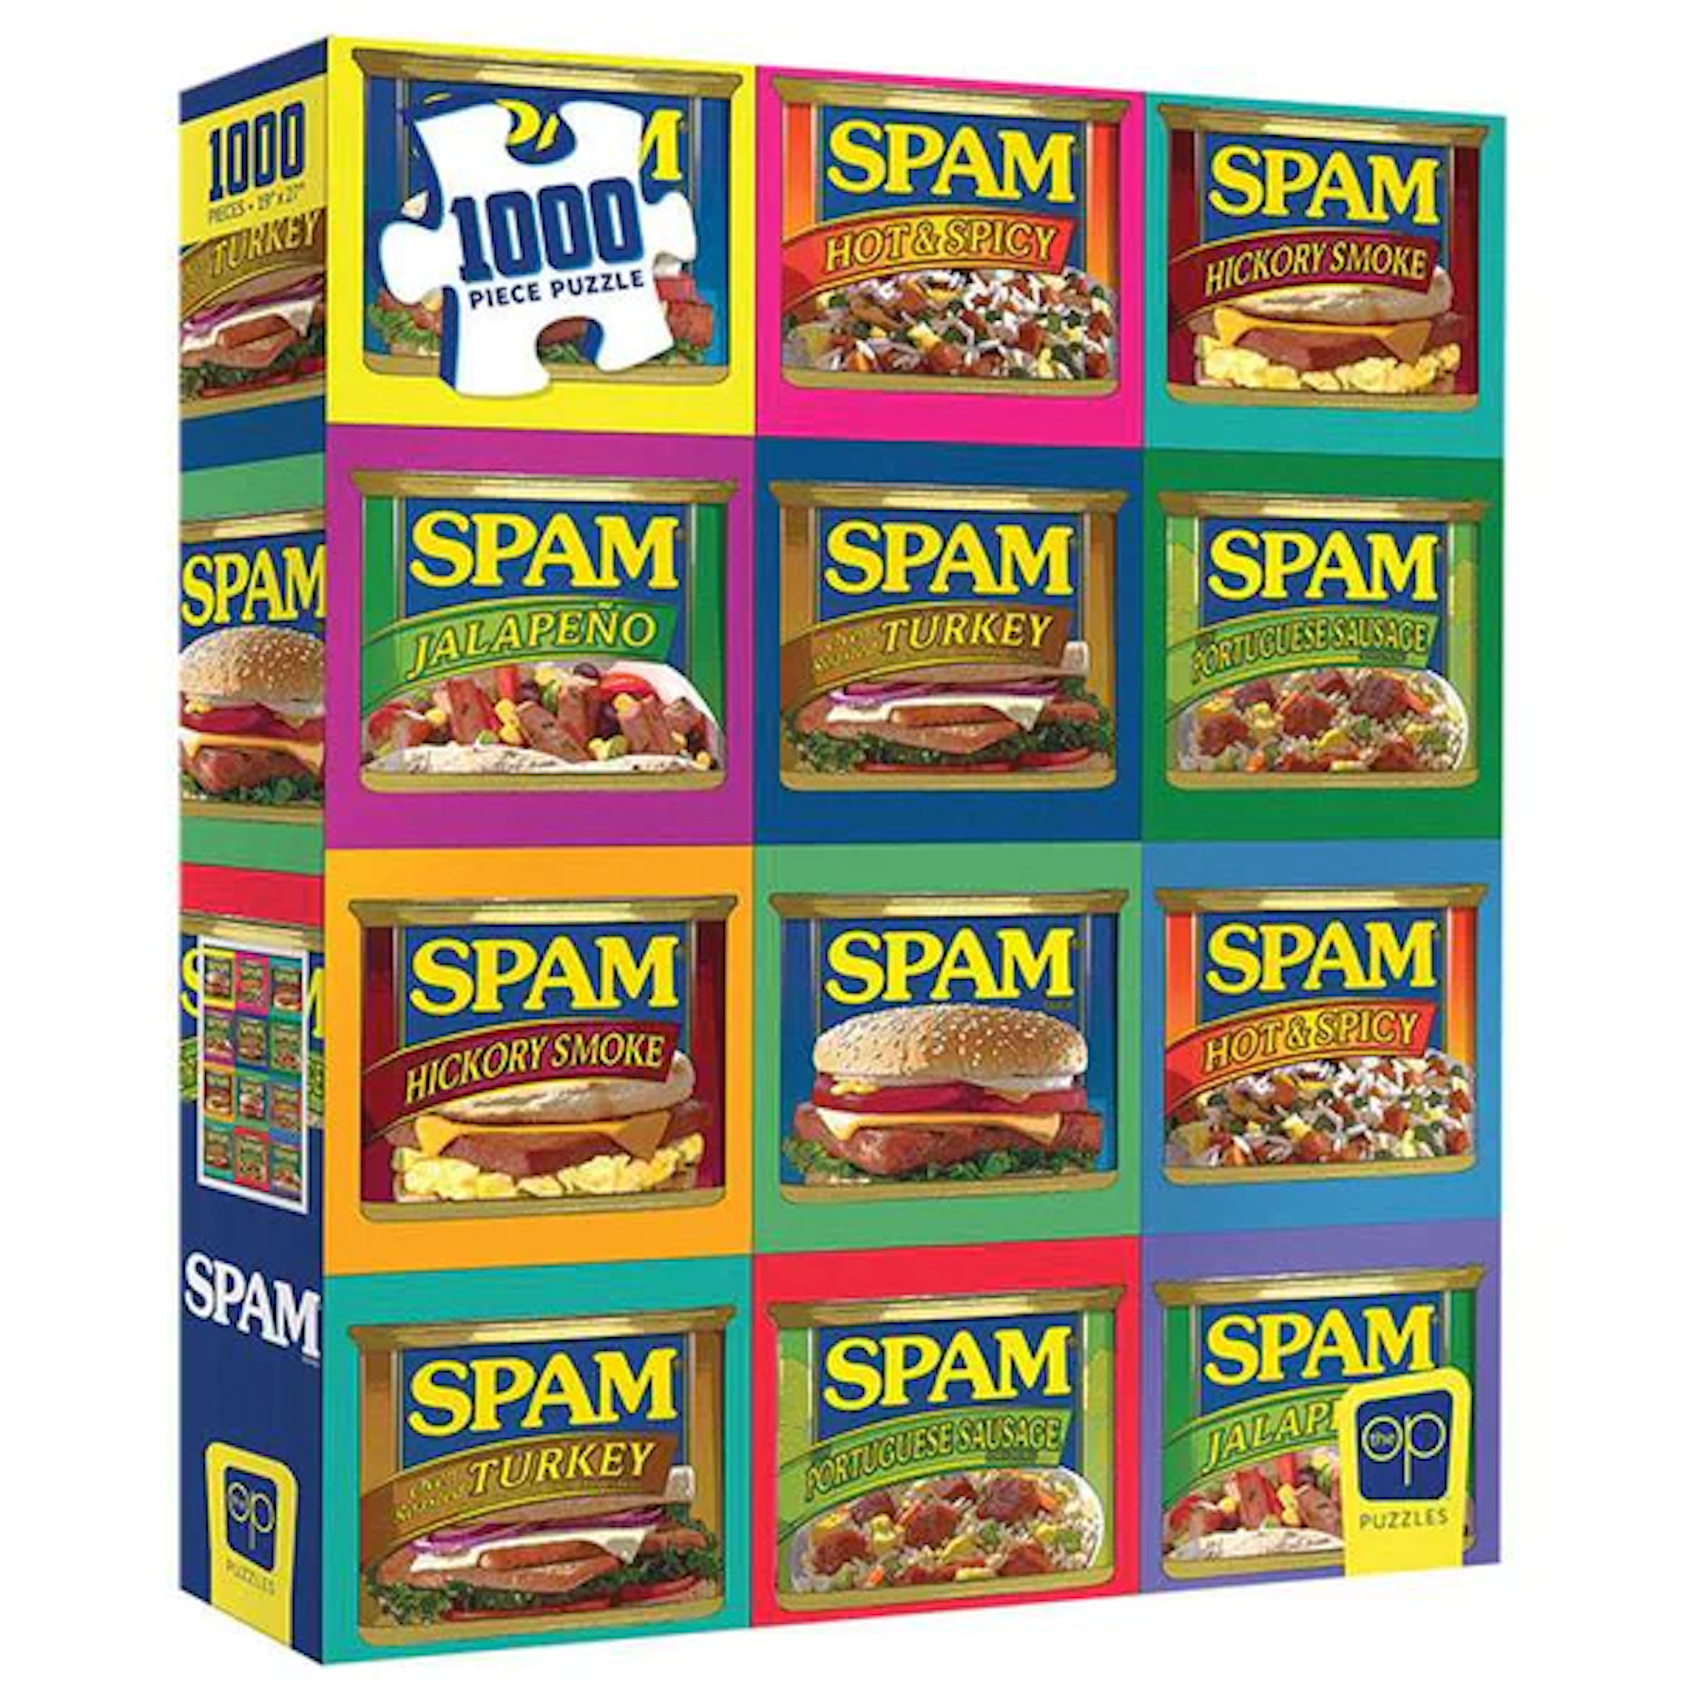 Spam: Sizzle. Pork. And. Mmm. (1000 pc puzzle)